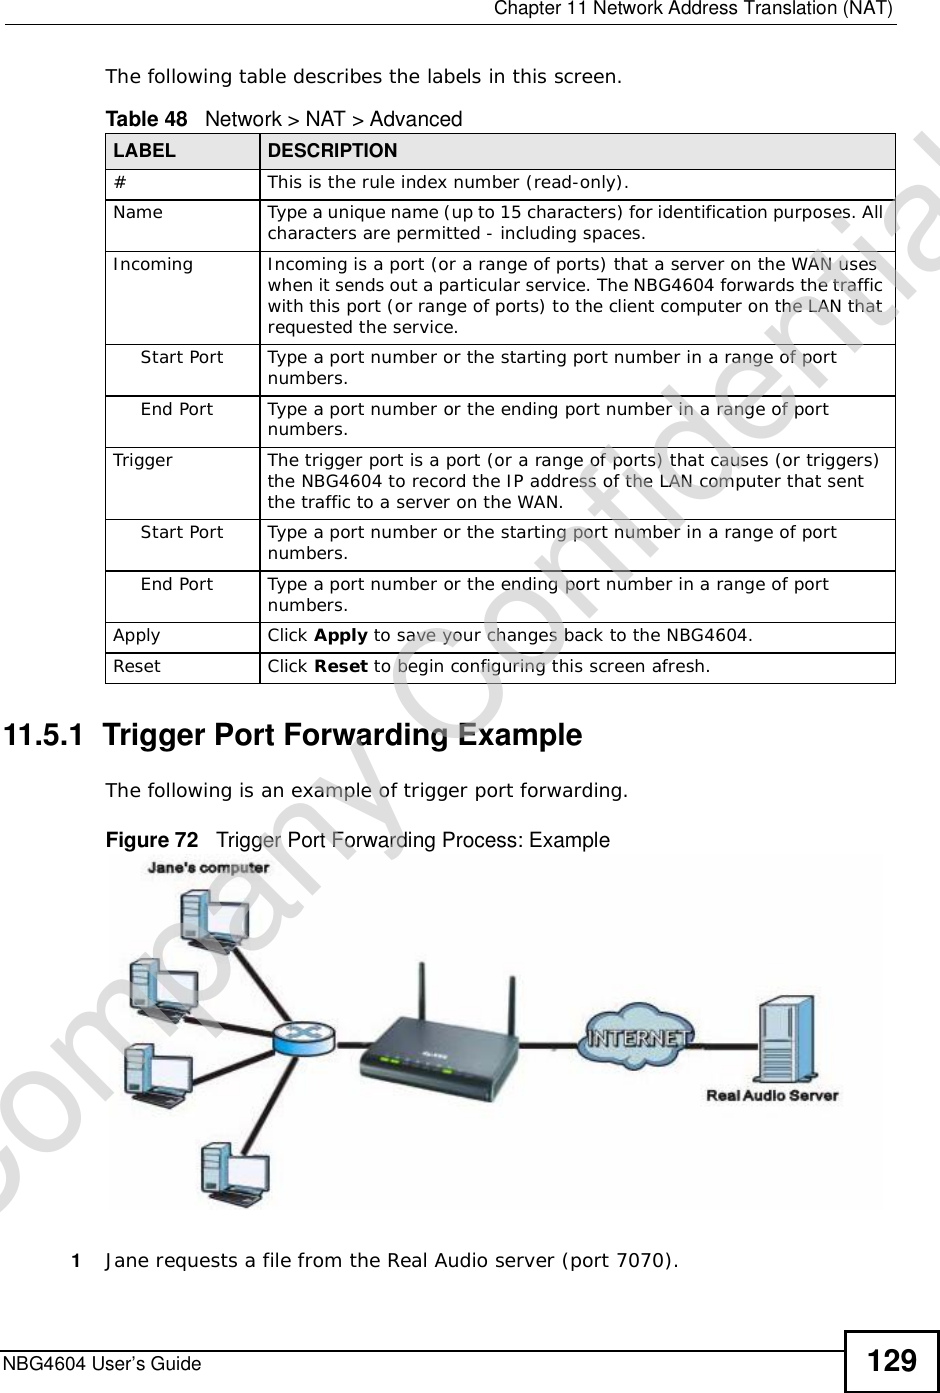  Chapter 11Network Address Translation (NAT)NBG4604 User’s Guide 129The following table describes the labels in this screen.11.5.1  Trigger Port Forwarding Example The following is an example of trigger port forwarding.Figure 72   Trigger Port Forwarding Process: Example1Jane requests a file from the Real Audio server (port 7070).Table 48   Network &gt; NAT &gt; AdvancedLABEL DESCRIPTION#This is the rule index number (read-only).Name Type a unique name (up to 15 characters) for identification purposes. All characters are permitted - including spaces.Incoming Incoming is a port (or a range of ports) that a server on the WAN uses when it sends out a particular service. The NBG4604 forwards the traffic with this port (or range of ports) to the client computer on the LAN that requested the service. Start Port Type a port number or the starting port number in a range of port numbers.End Port Type a port number or the ending port number in a range of port numbers.Trigger The trigger port is a port (or a range of ports) that causes (or triggers) the NBG4604 to record the IP address of the LAN computer that sent the traffic to a server on the WAN.Start Port Type a port number or the starting port number in a range of port numbers.End Port Type a port number or the ending port number in a range of port numbers.Apply Click Apply to save your changes back to the NBG4604.Reset Click Reset to begin configuring this screen afresh.Company Confidential